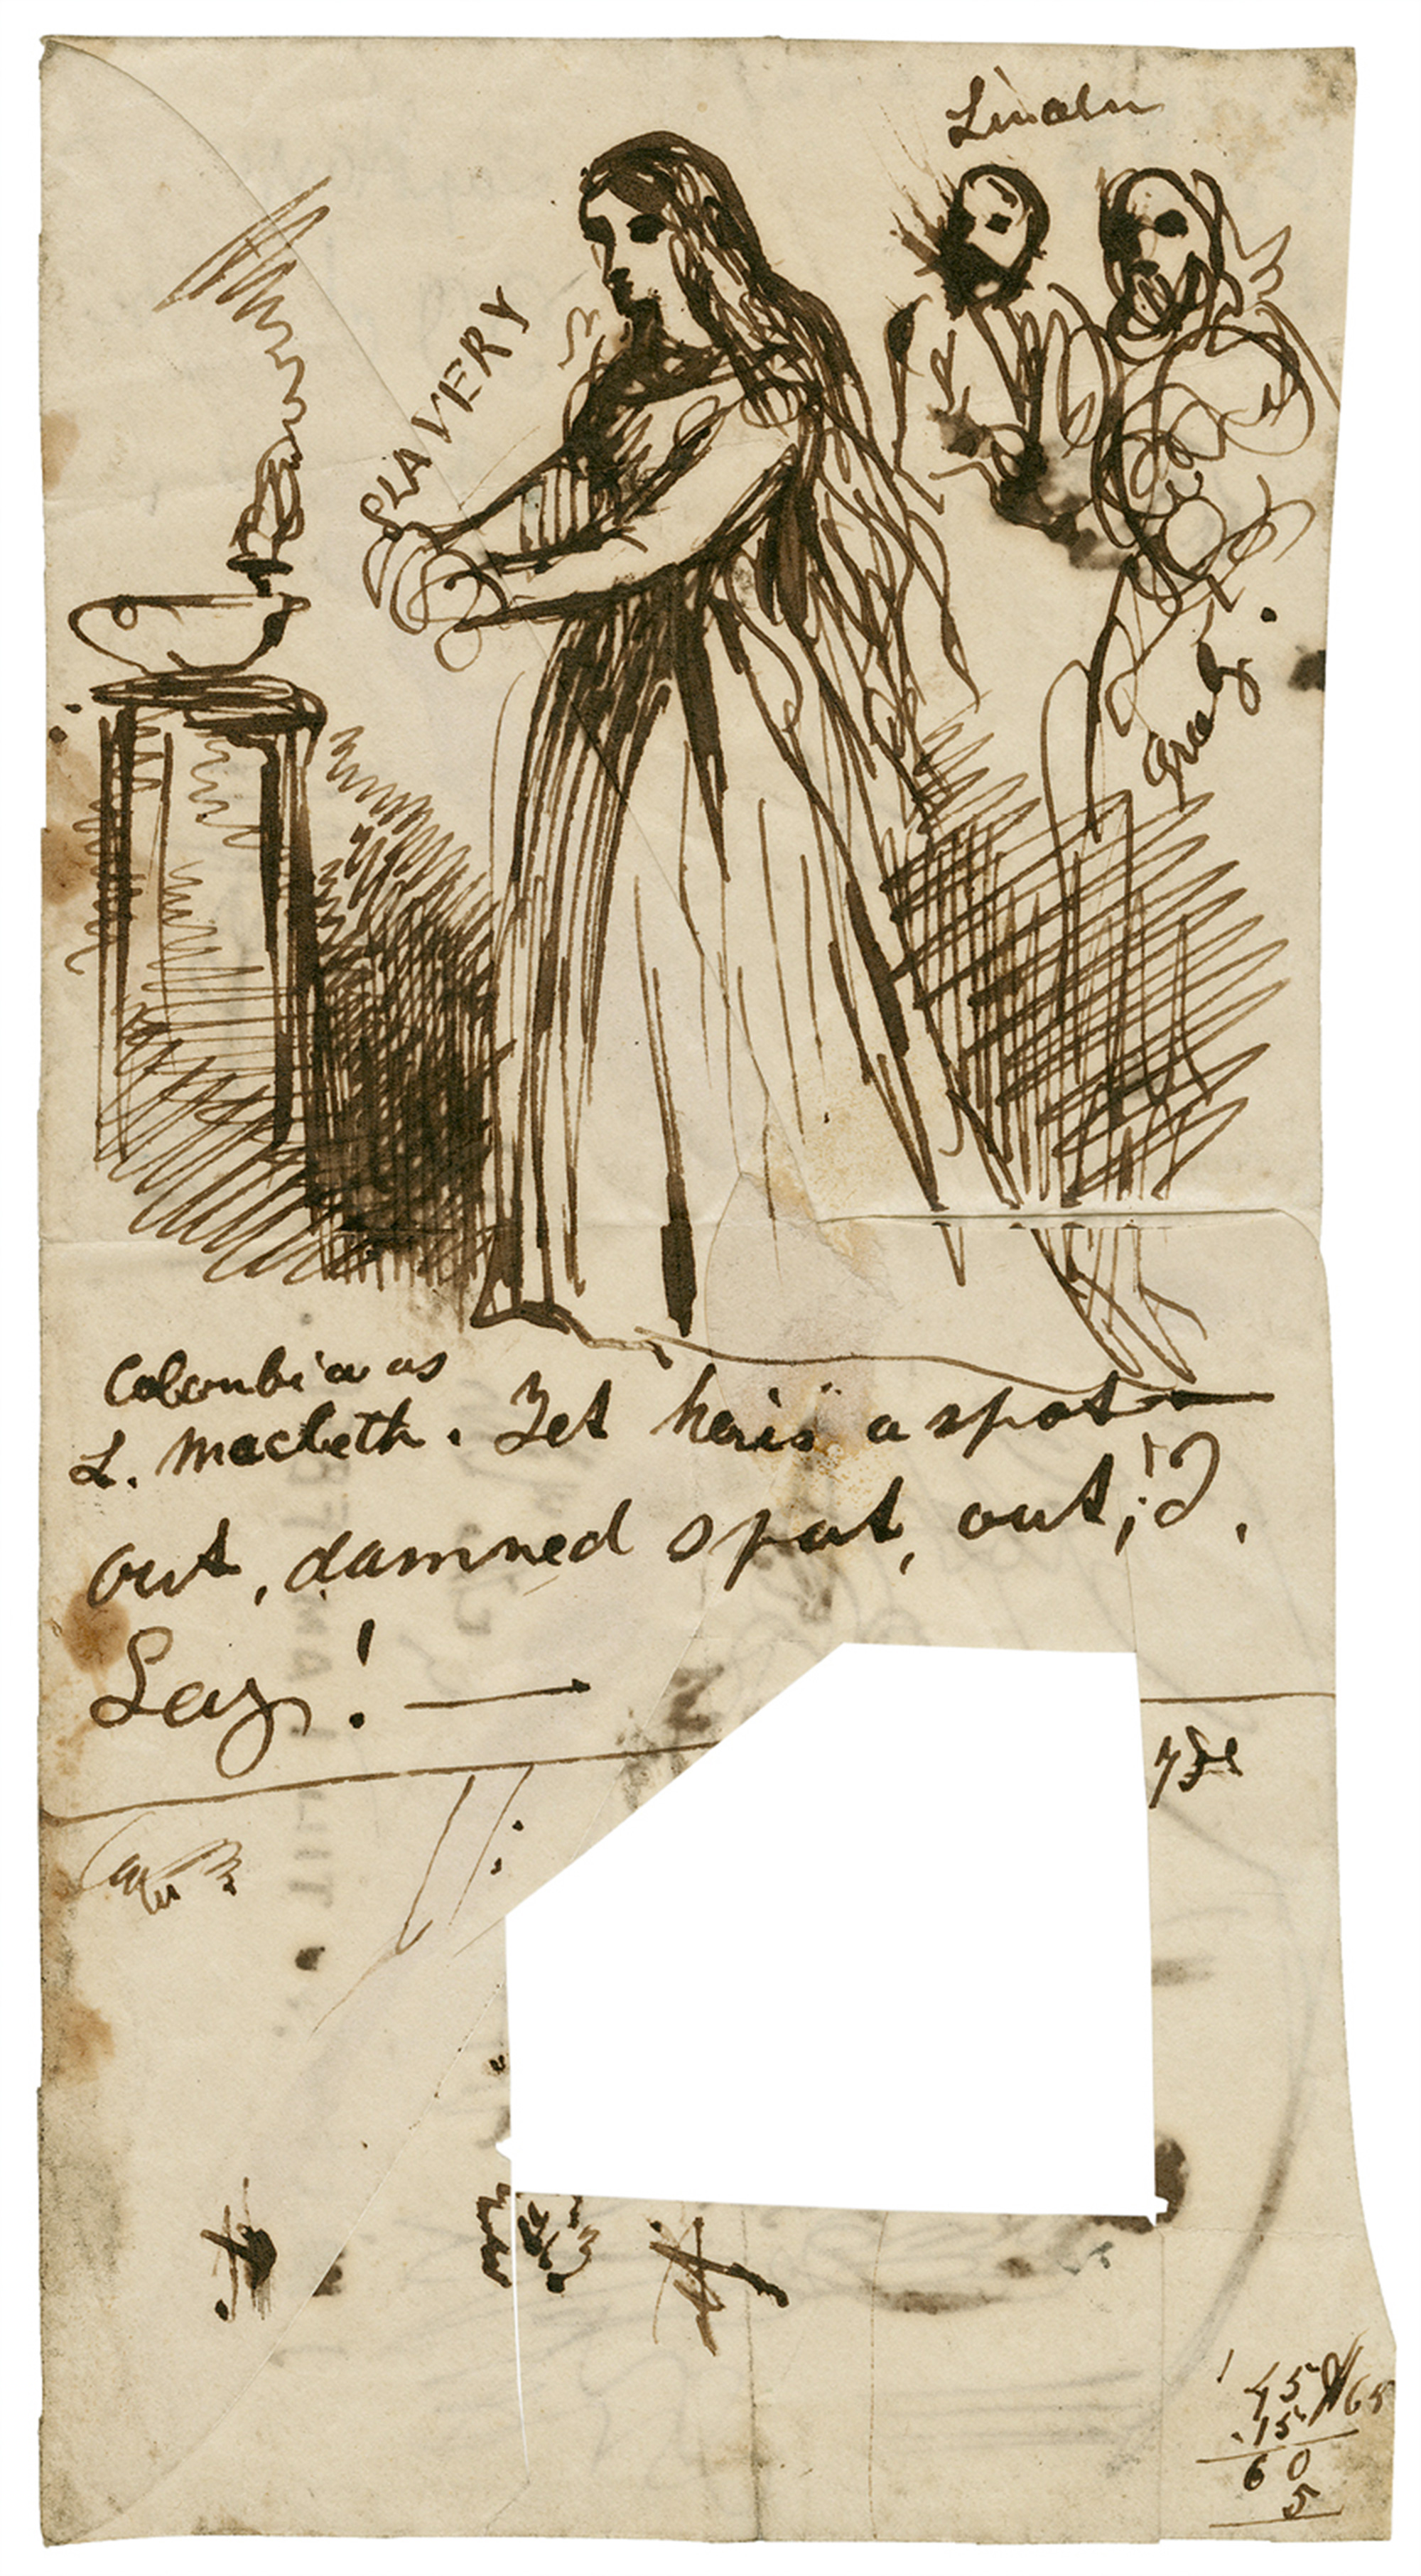 An ink drawing of Lady Macbeth scrubbing at the ineradicable stain, here labeled as “slavery.” Lincoln and Greeley are sketched in the background, transforming the scene of her eternal guilt into an allegory for America’s inability to wash away the sins of slavery. 